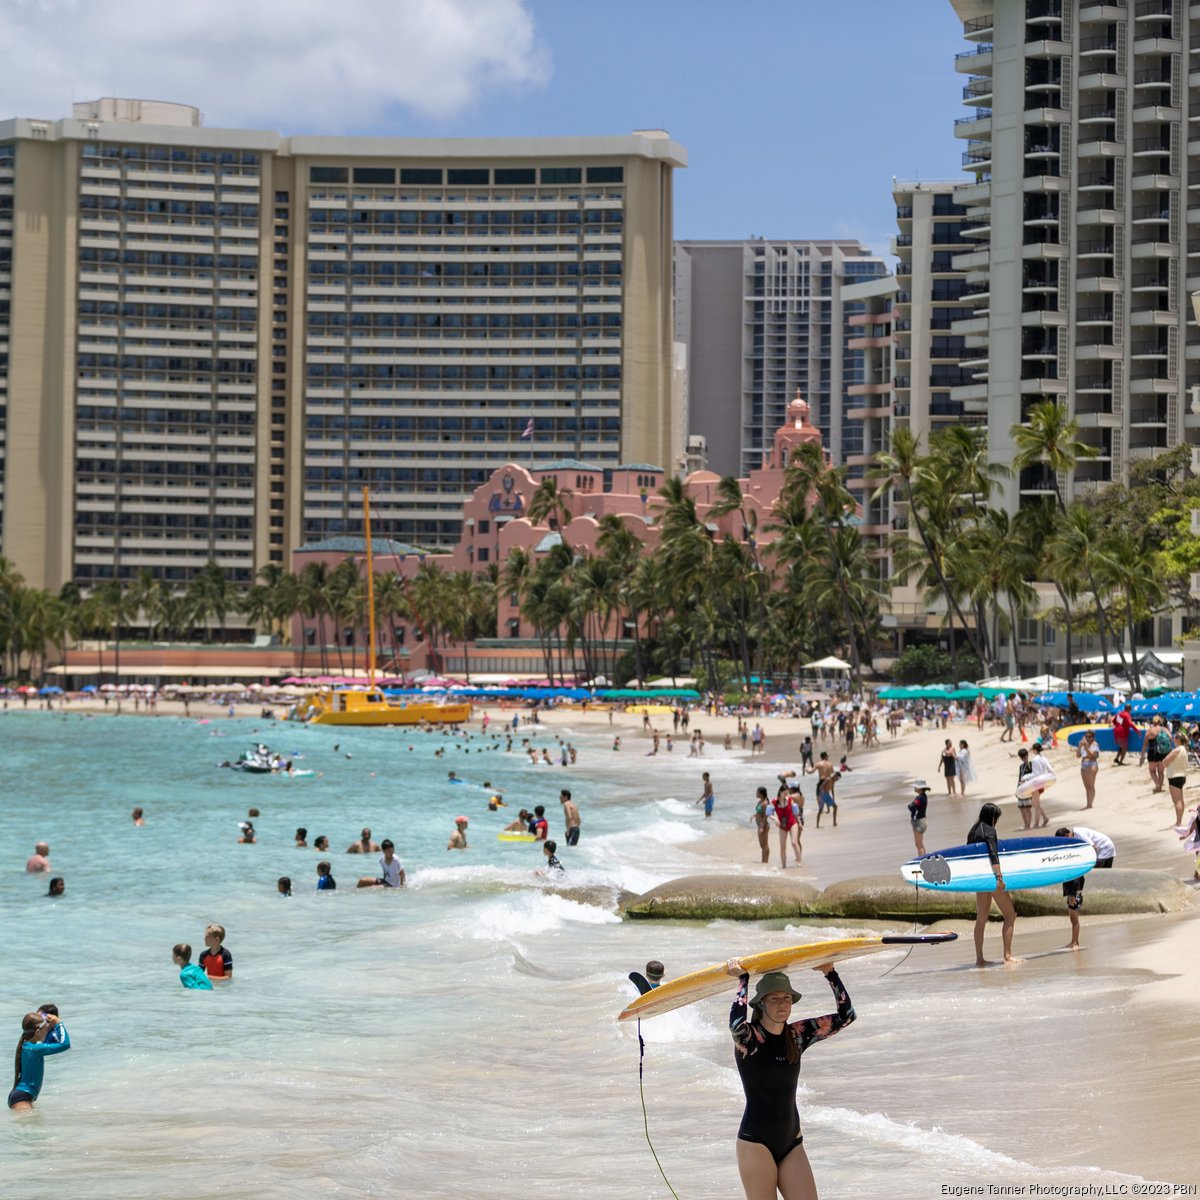 Hawaii Hoteliers Drop Rates To Keep Occupancy High Amid Leisure Travel  Fatigue